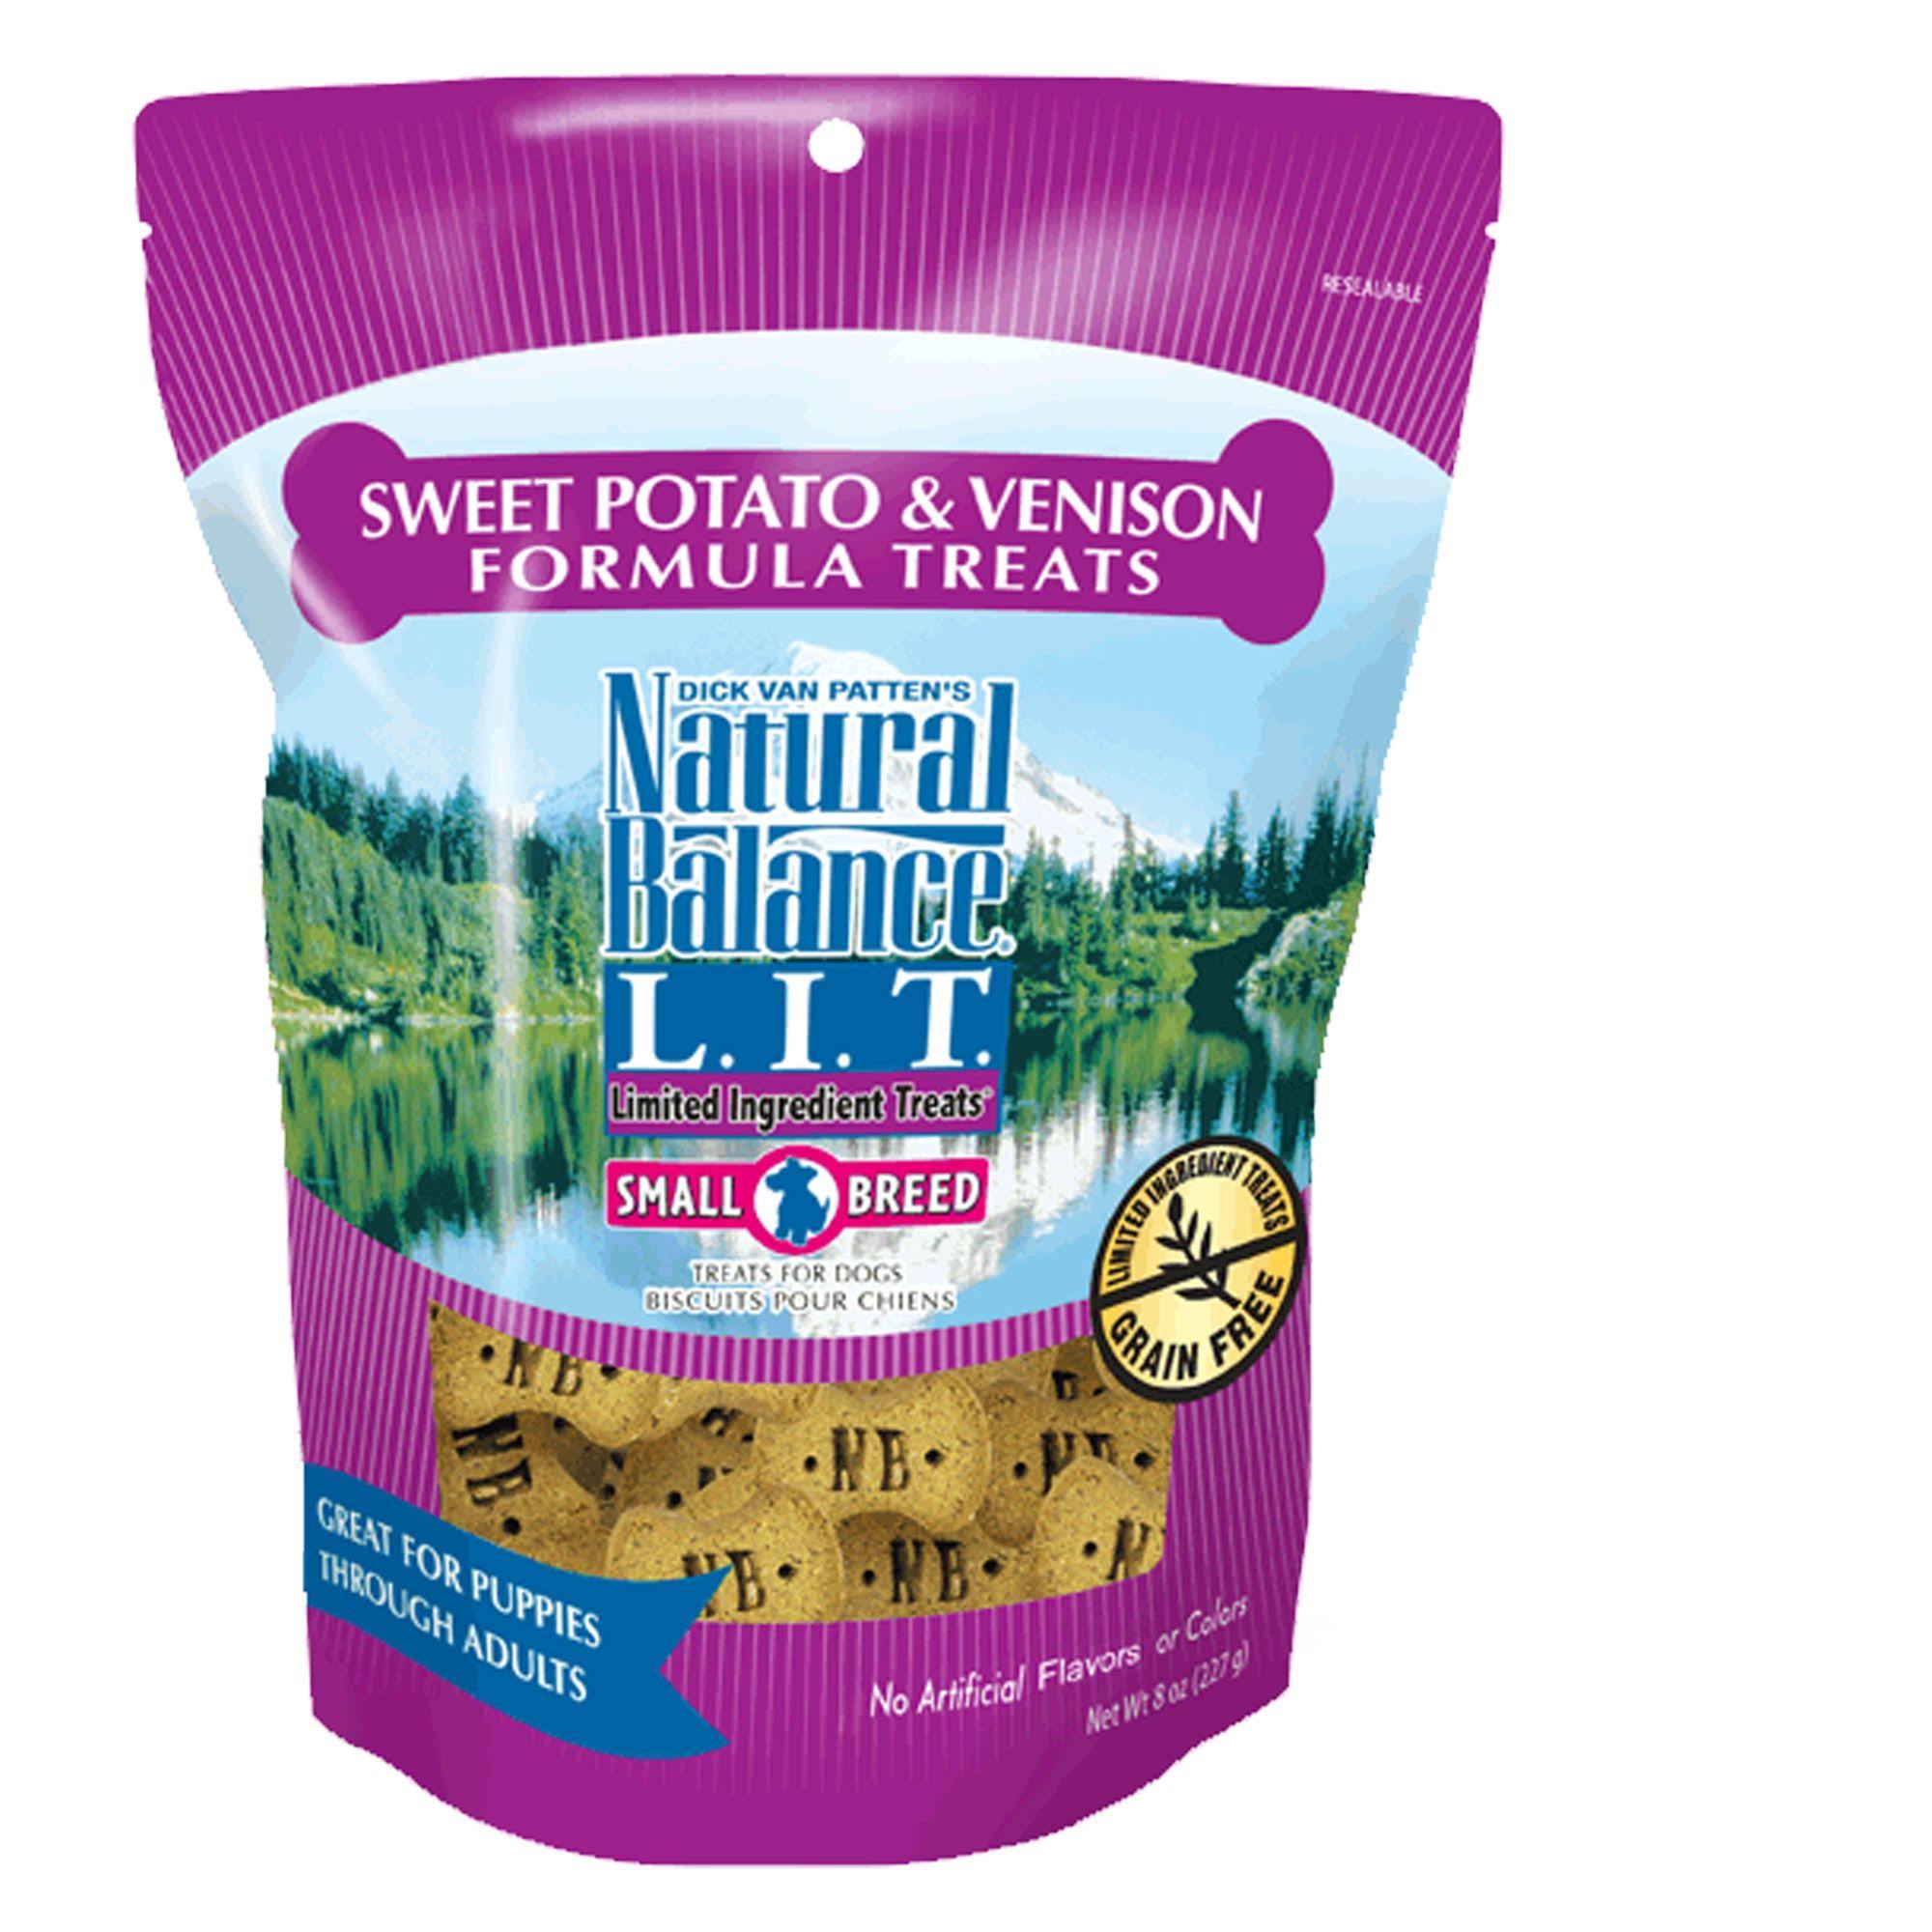 Natural Balance L.I.D. Limited Ingredient Diets Treats for Dogs, Grain Free, Sweet Potato & Venison Formula, Original Biscuits, Small Breed - 8 oz